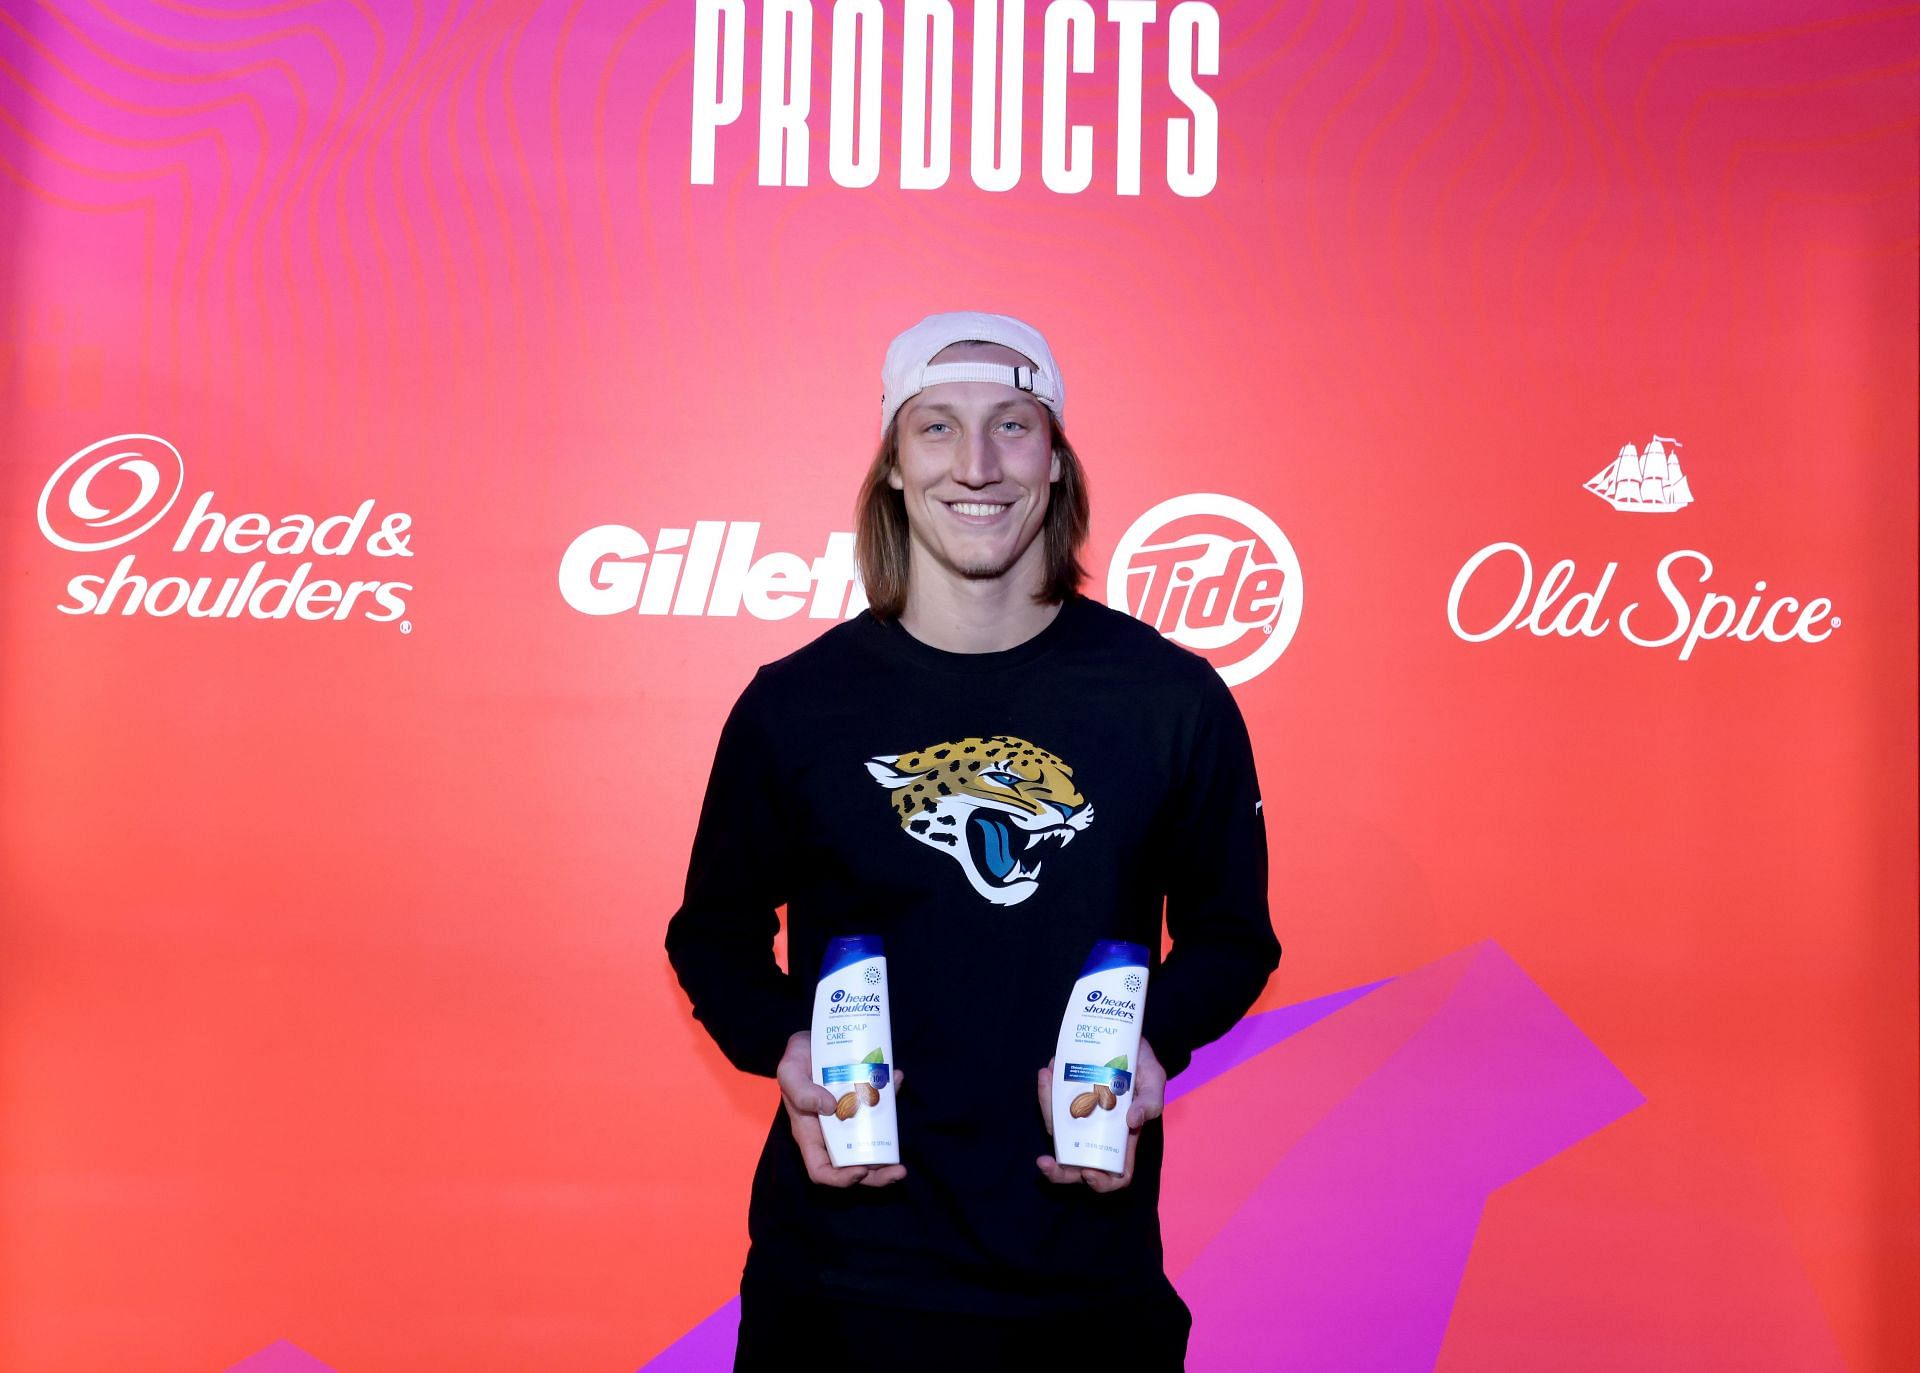 Procter &amp; Gamble and Its Brands Presents First-Ever P&amp;G Ping Pong Bowl at Super Bowl LVII